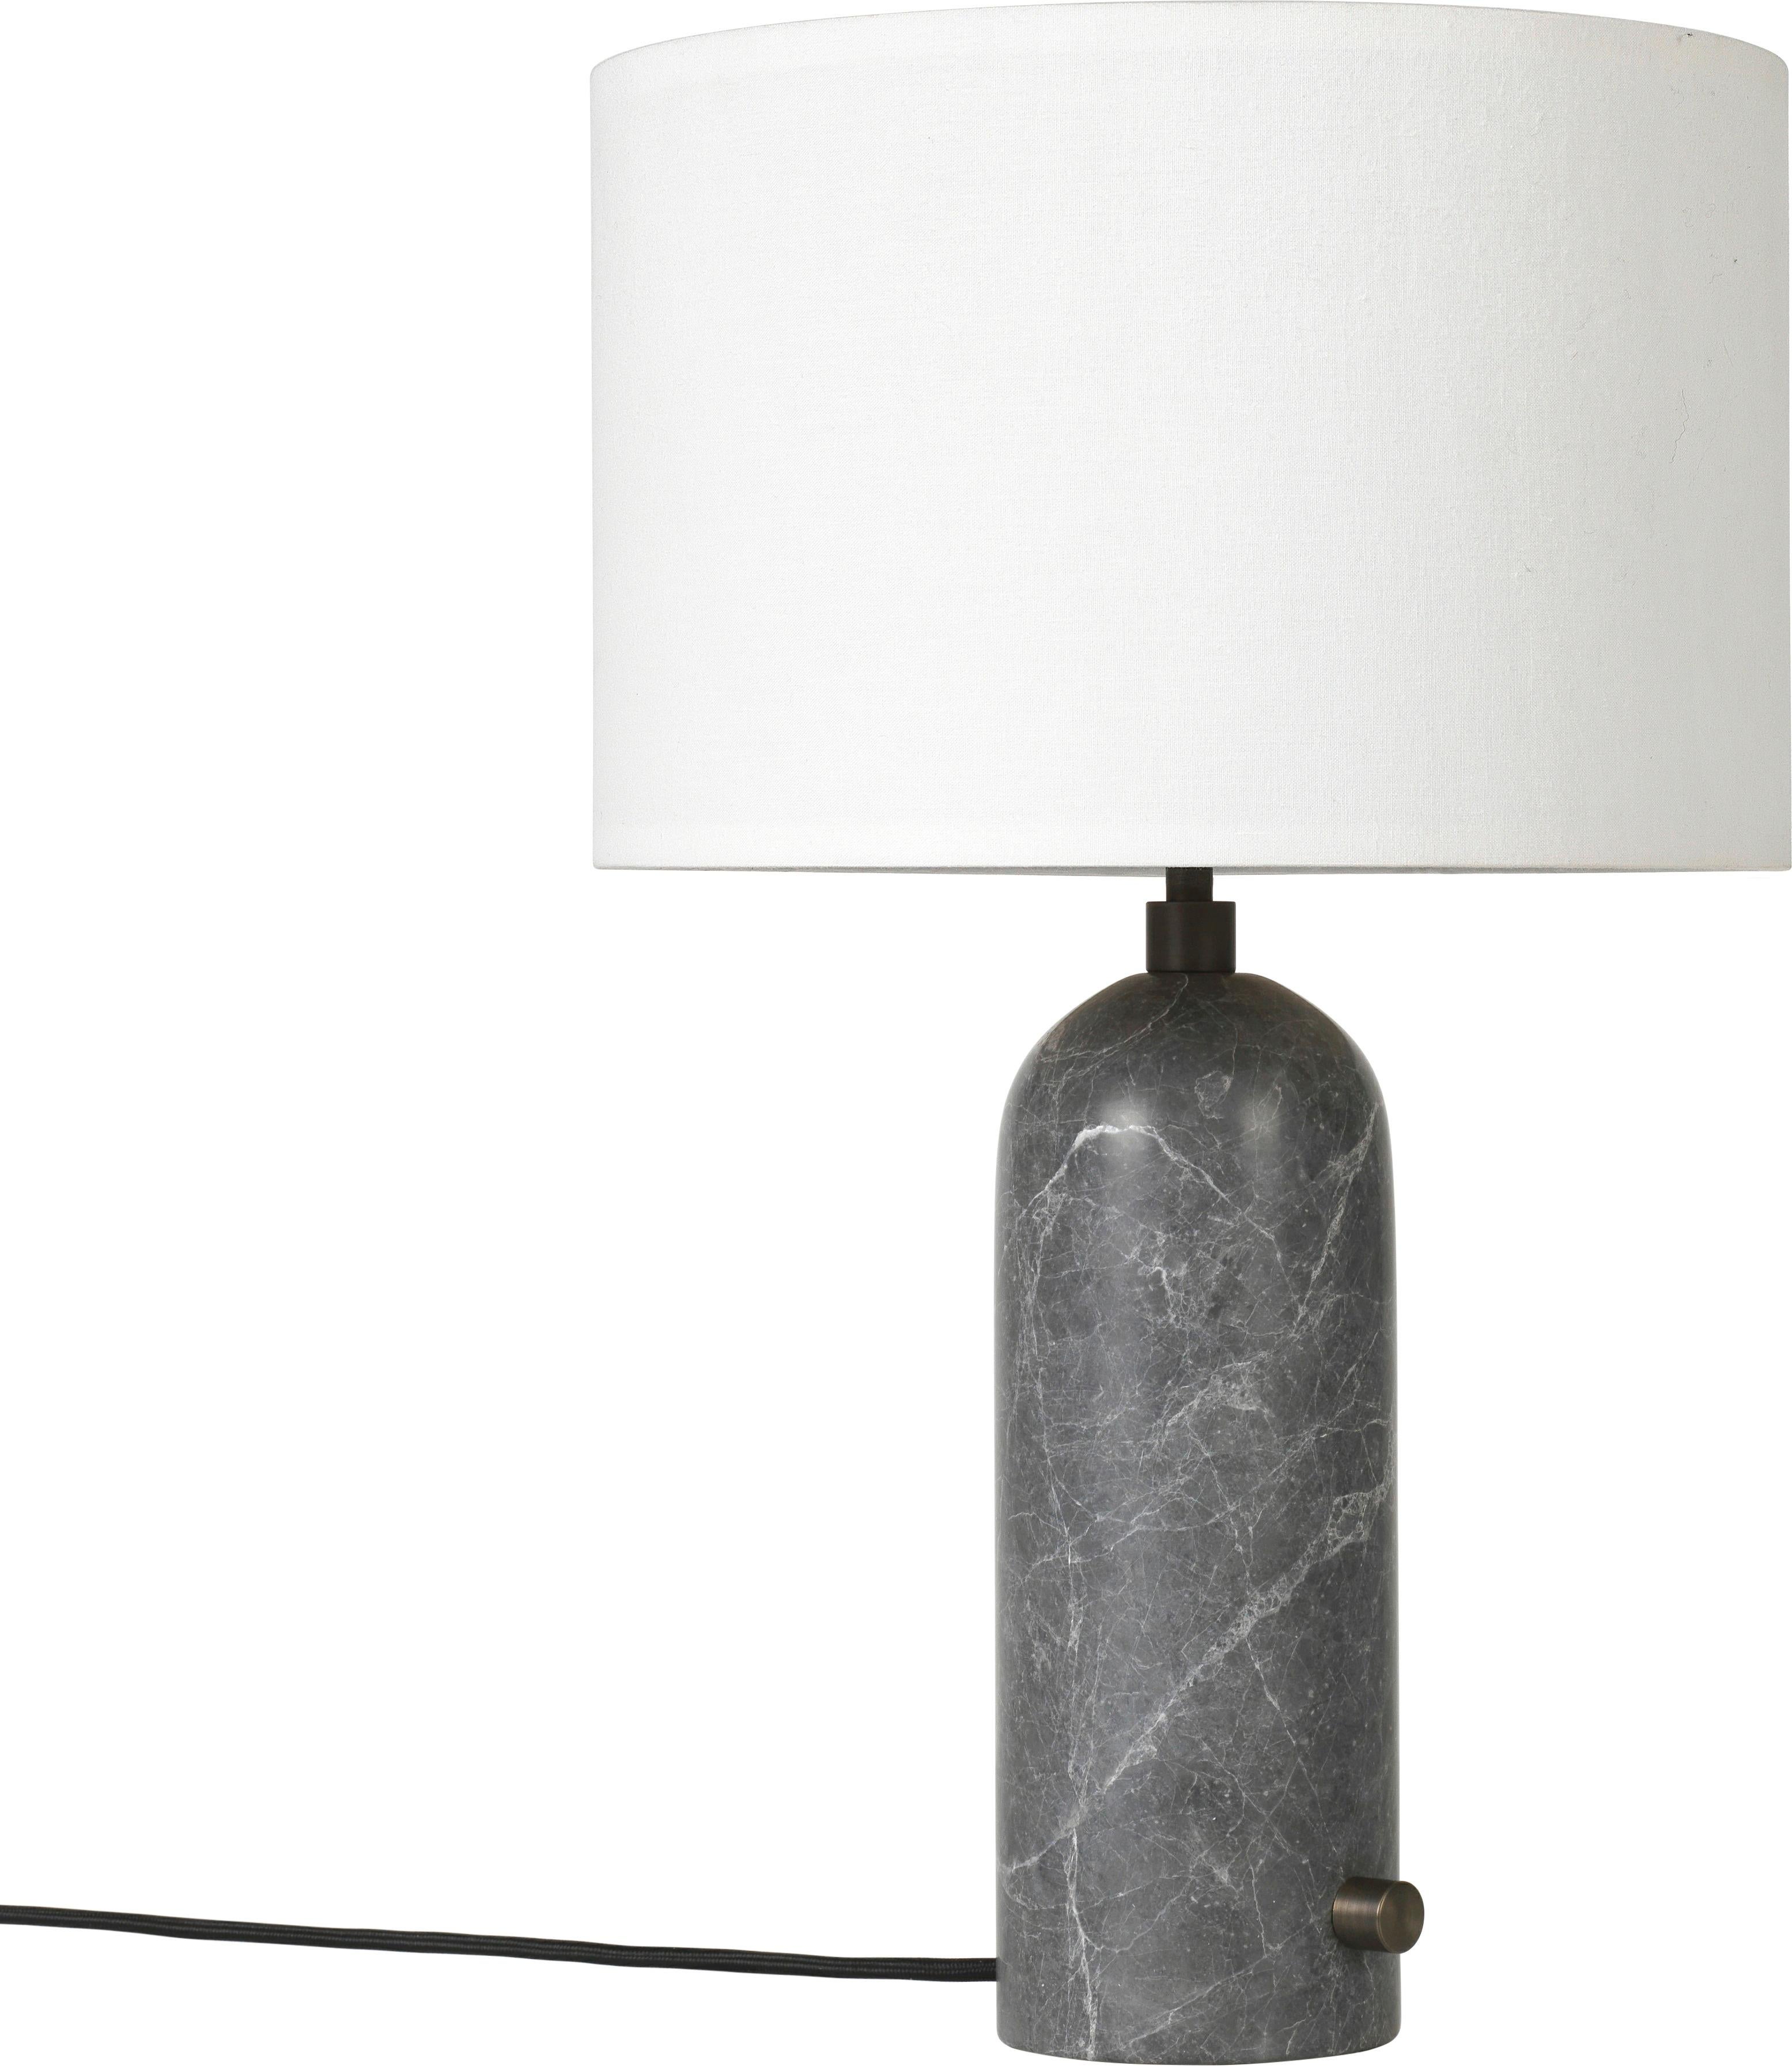 Small 'Gravity' Blackened Steel Table Lamp by Space Copenhagen for Gubi For Sale 8